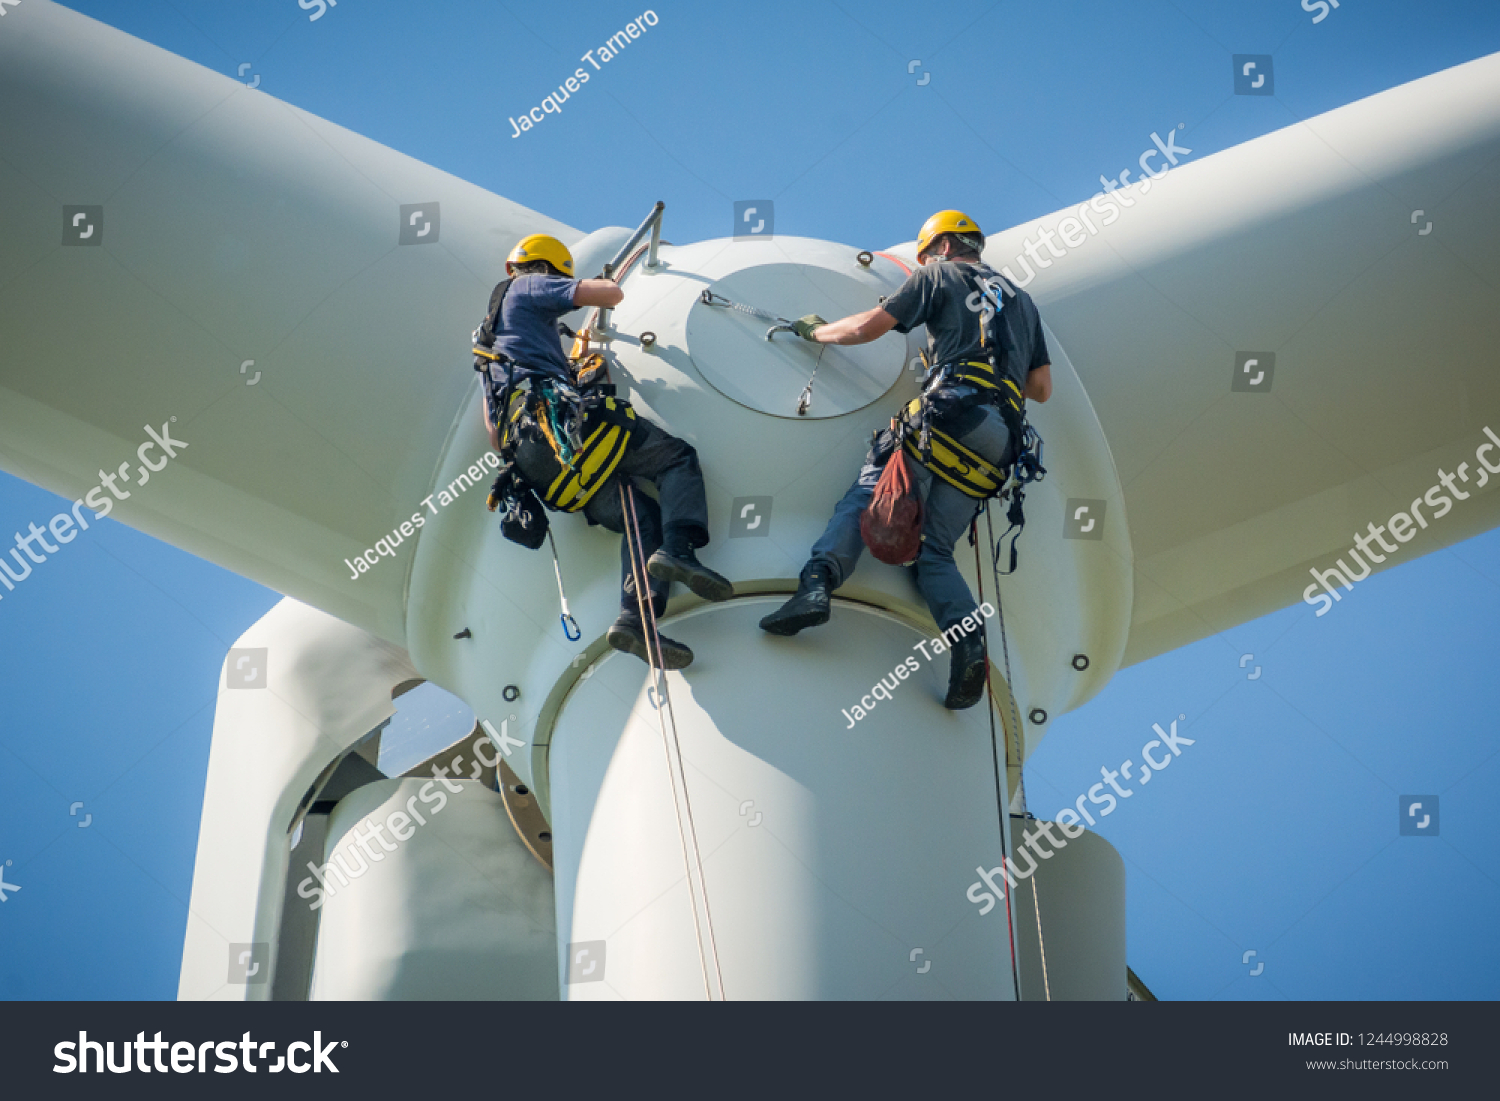 Inspection engineers preparing to rappel down a rotor blade of a wind turbine in a North German wind farm on a clear day with blue sky. #1244998828